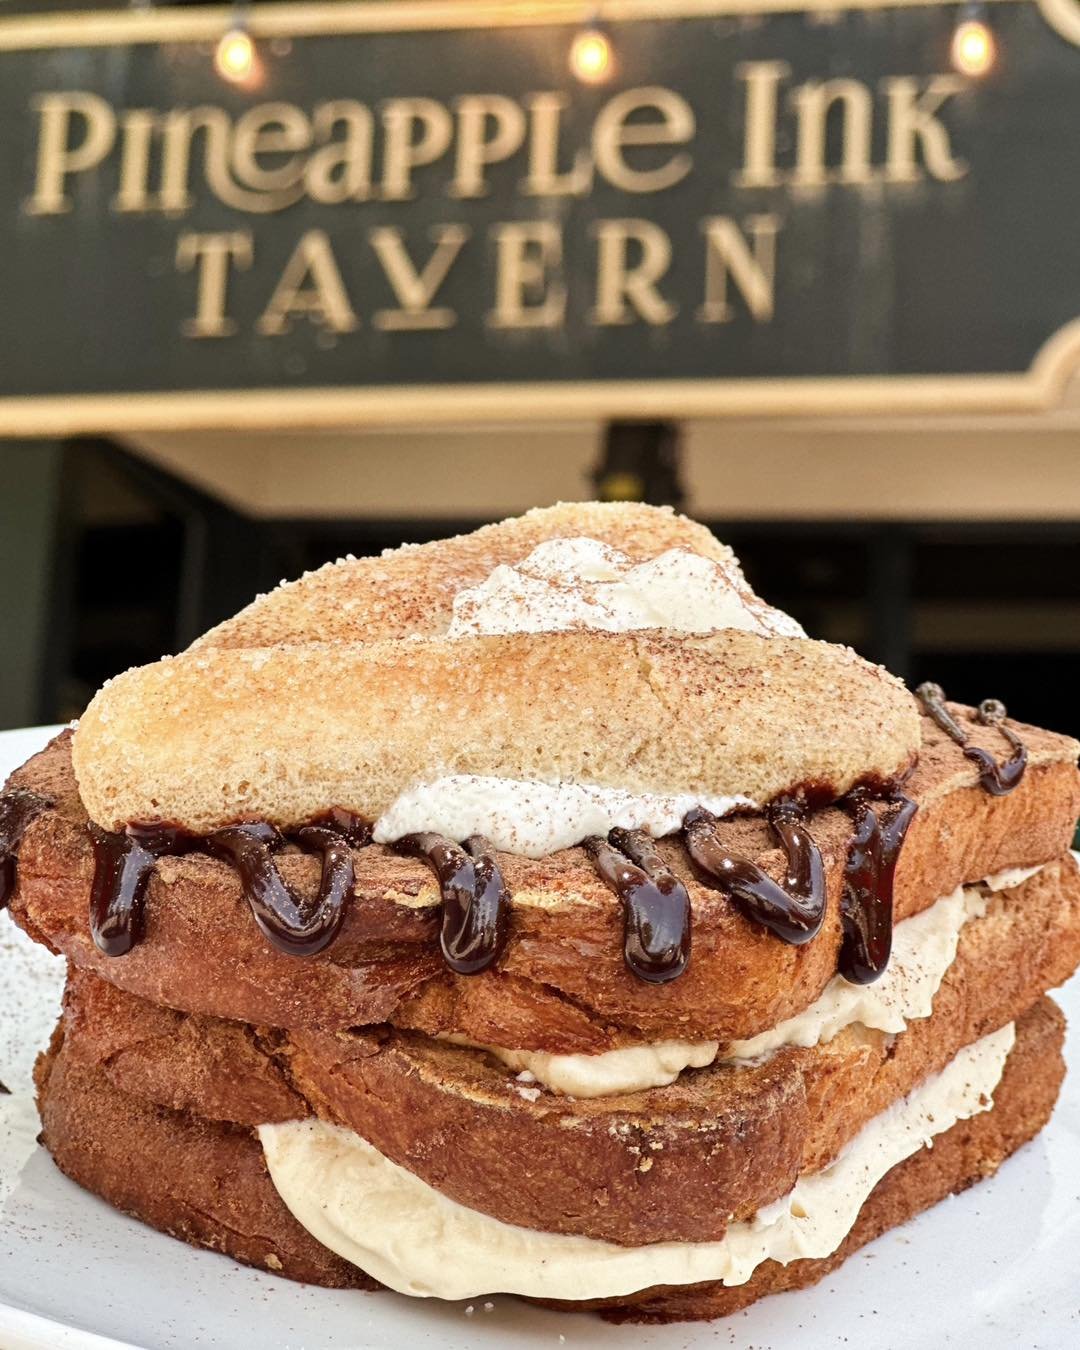 Come brunch with us and enjoy this irresistible Tiramisu French Toast! ☕🍫 Indulge in layers of espresso-soaked goodness topped with luscious mascarpone and lady fingers. Don't miss out! 

#WeekendBrunch #TiramisuDelight #PineappleInkTavern